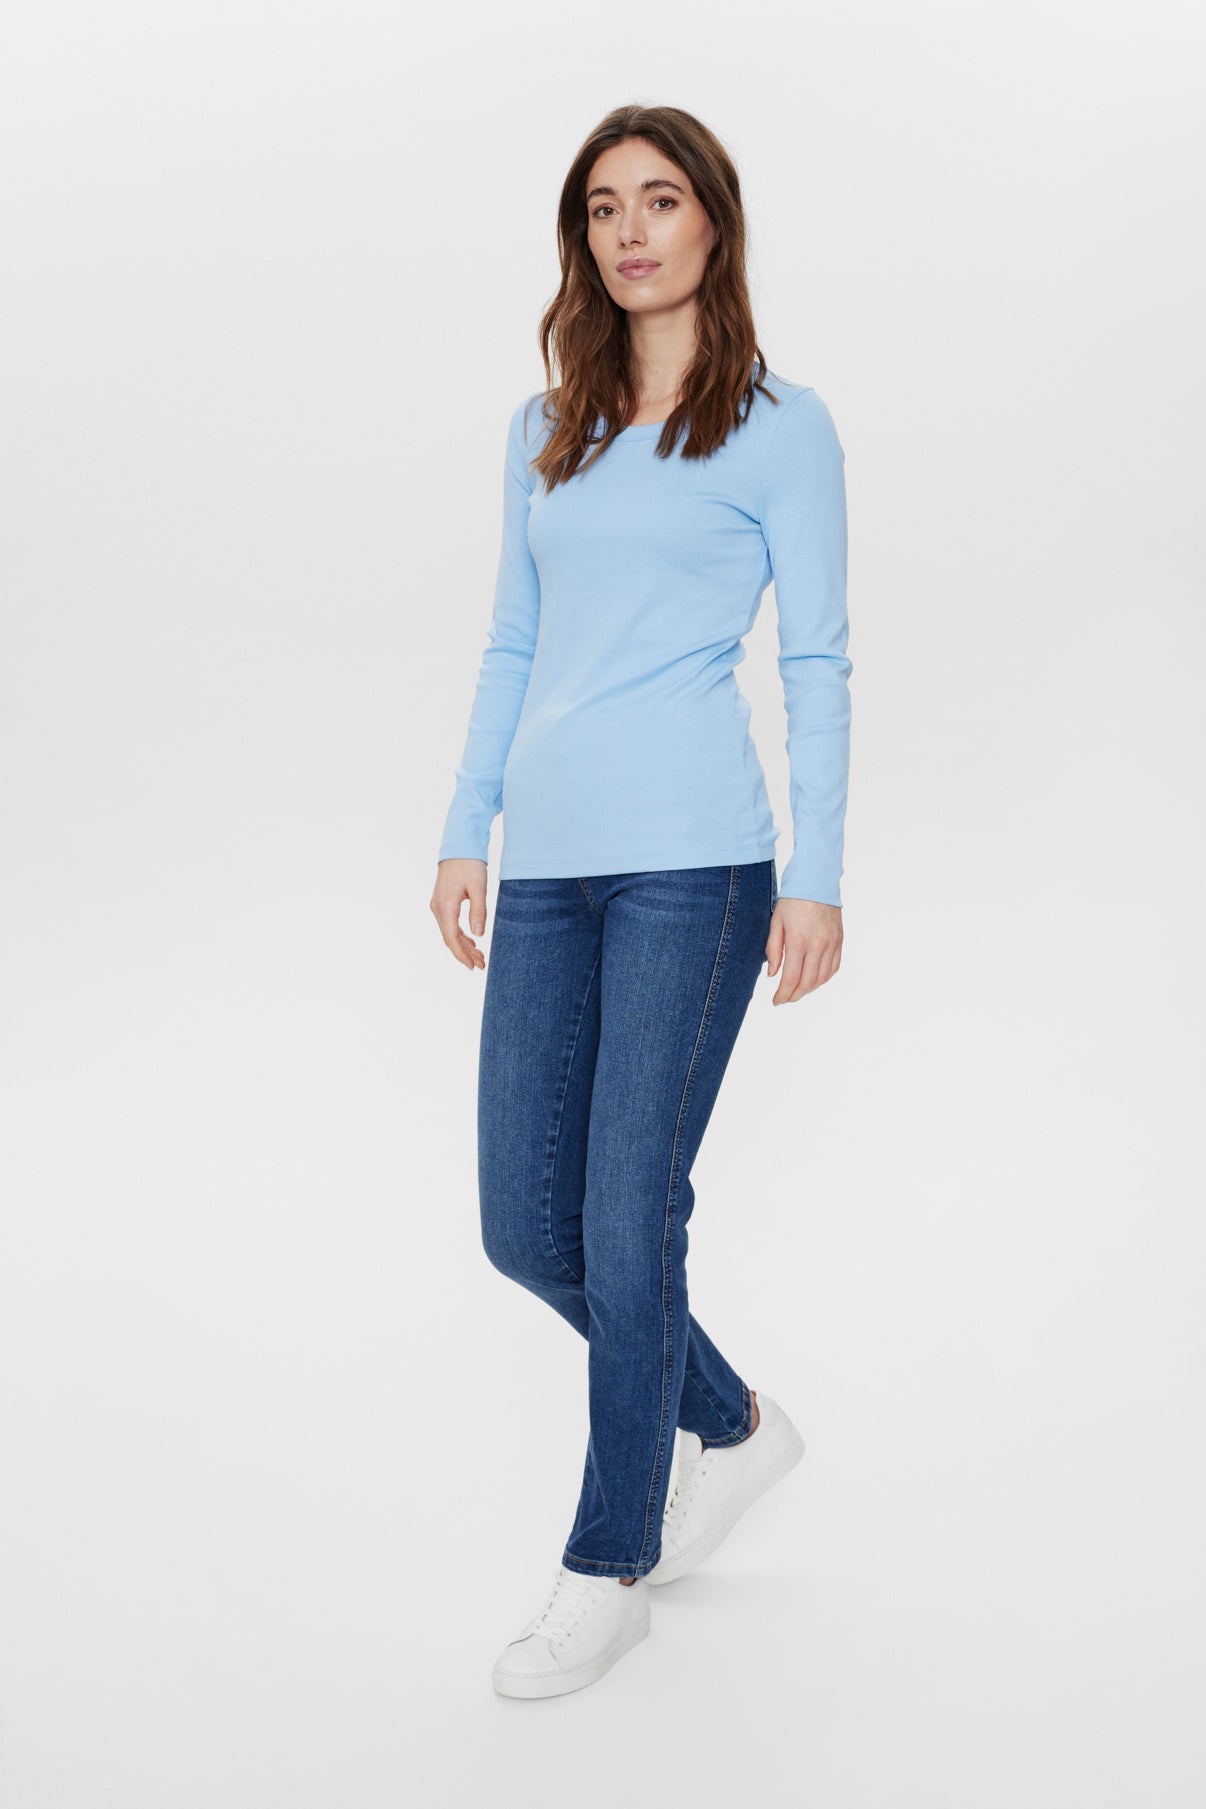 THERESE T-shirt L/S Camille 9619